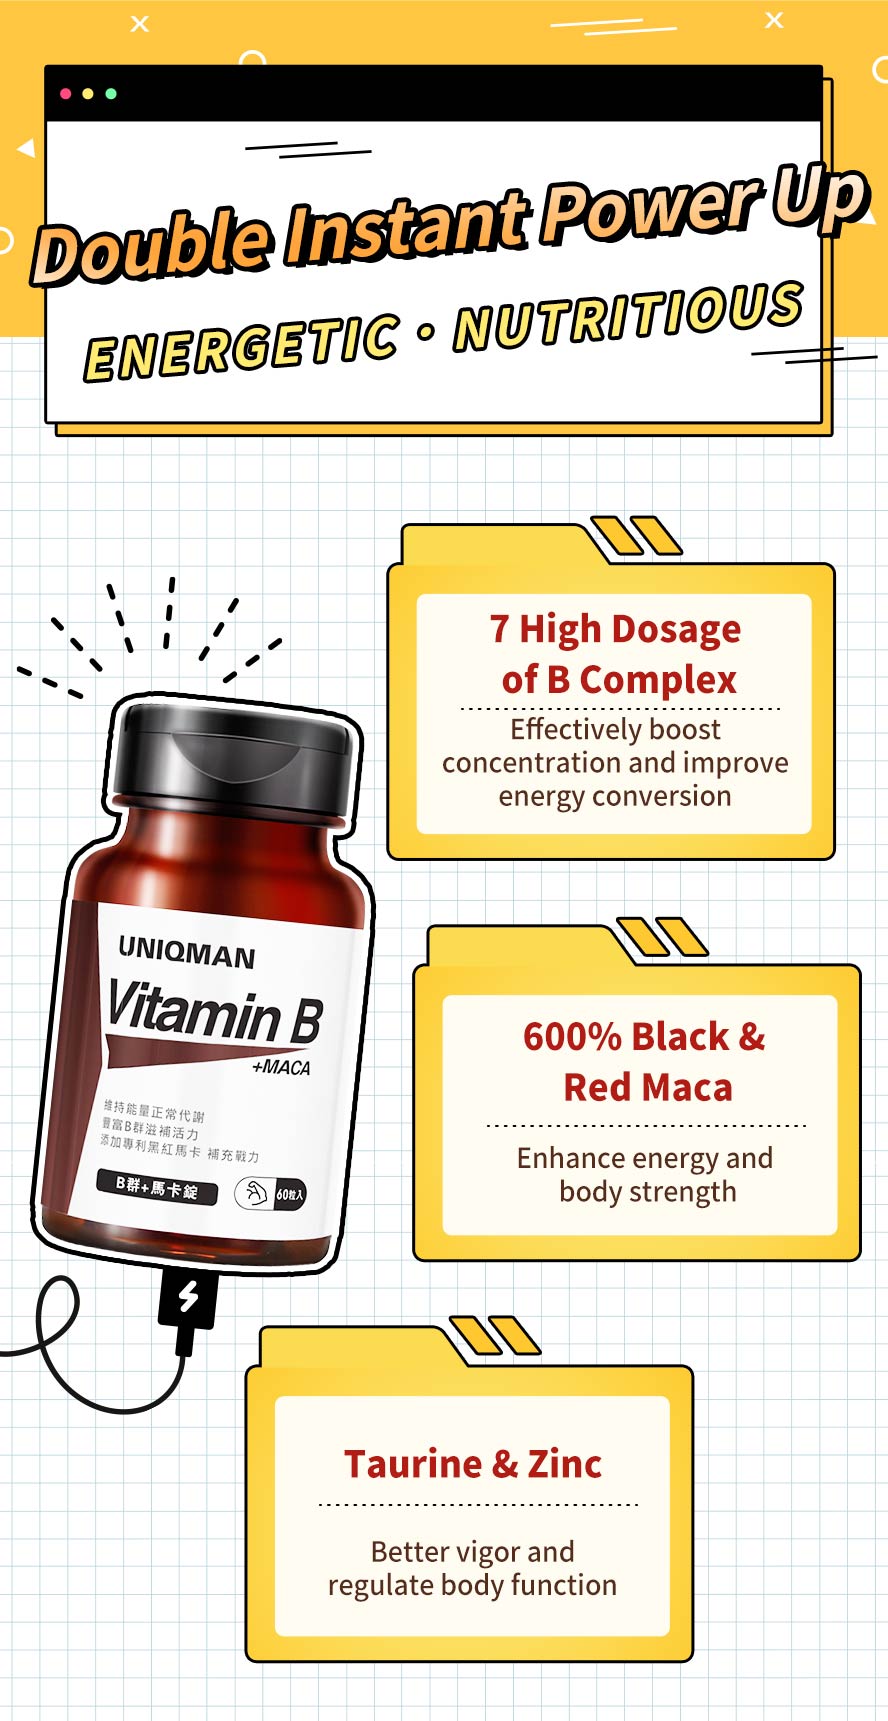 UNIQMAN B Complex contains 7 high high dosage of b-complex, 600% black & red maca, taurine, and zinc to boost concentration, vigor, strength, and regulate body function.